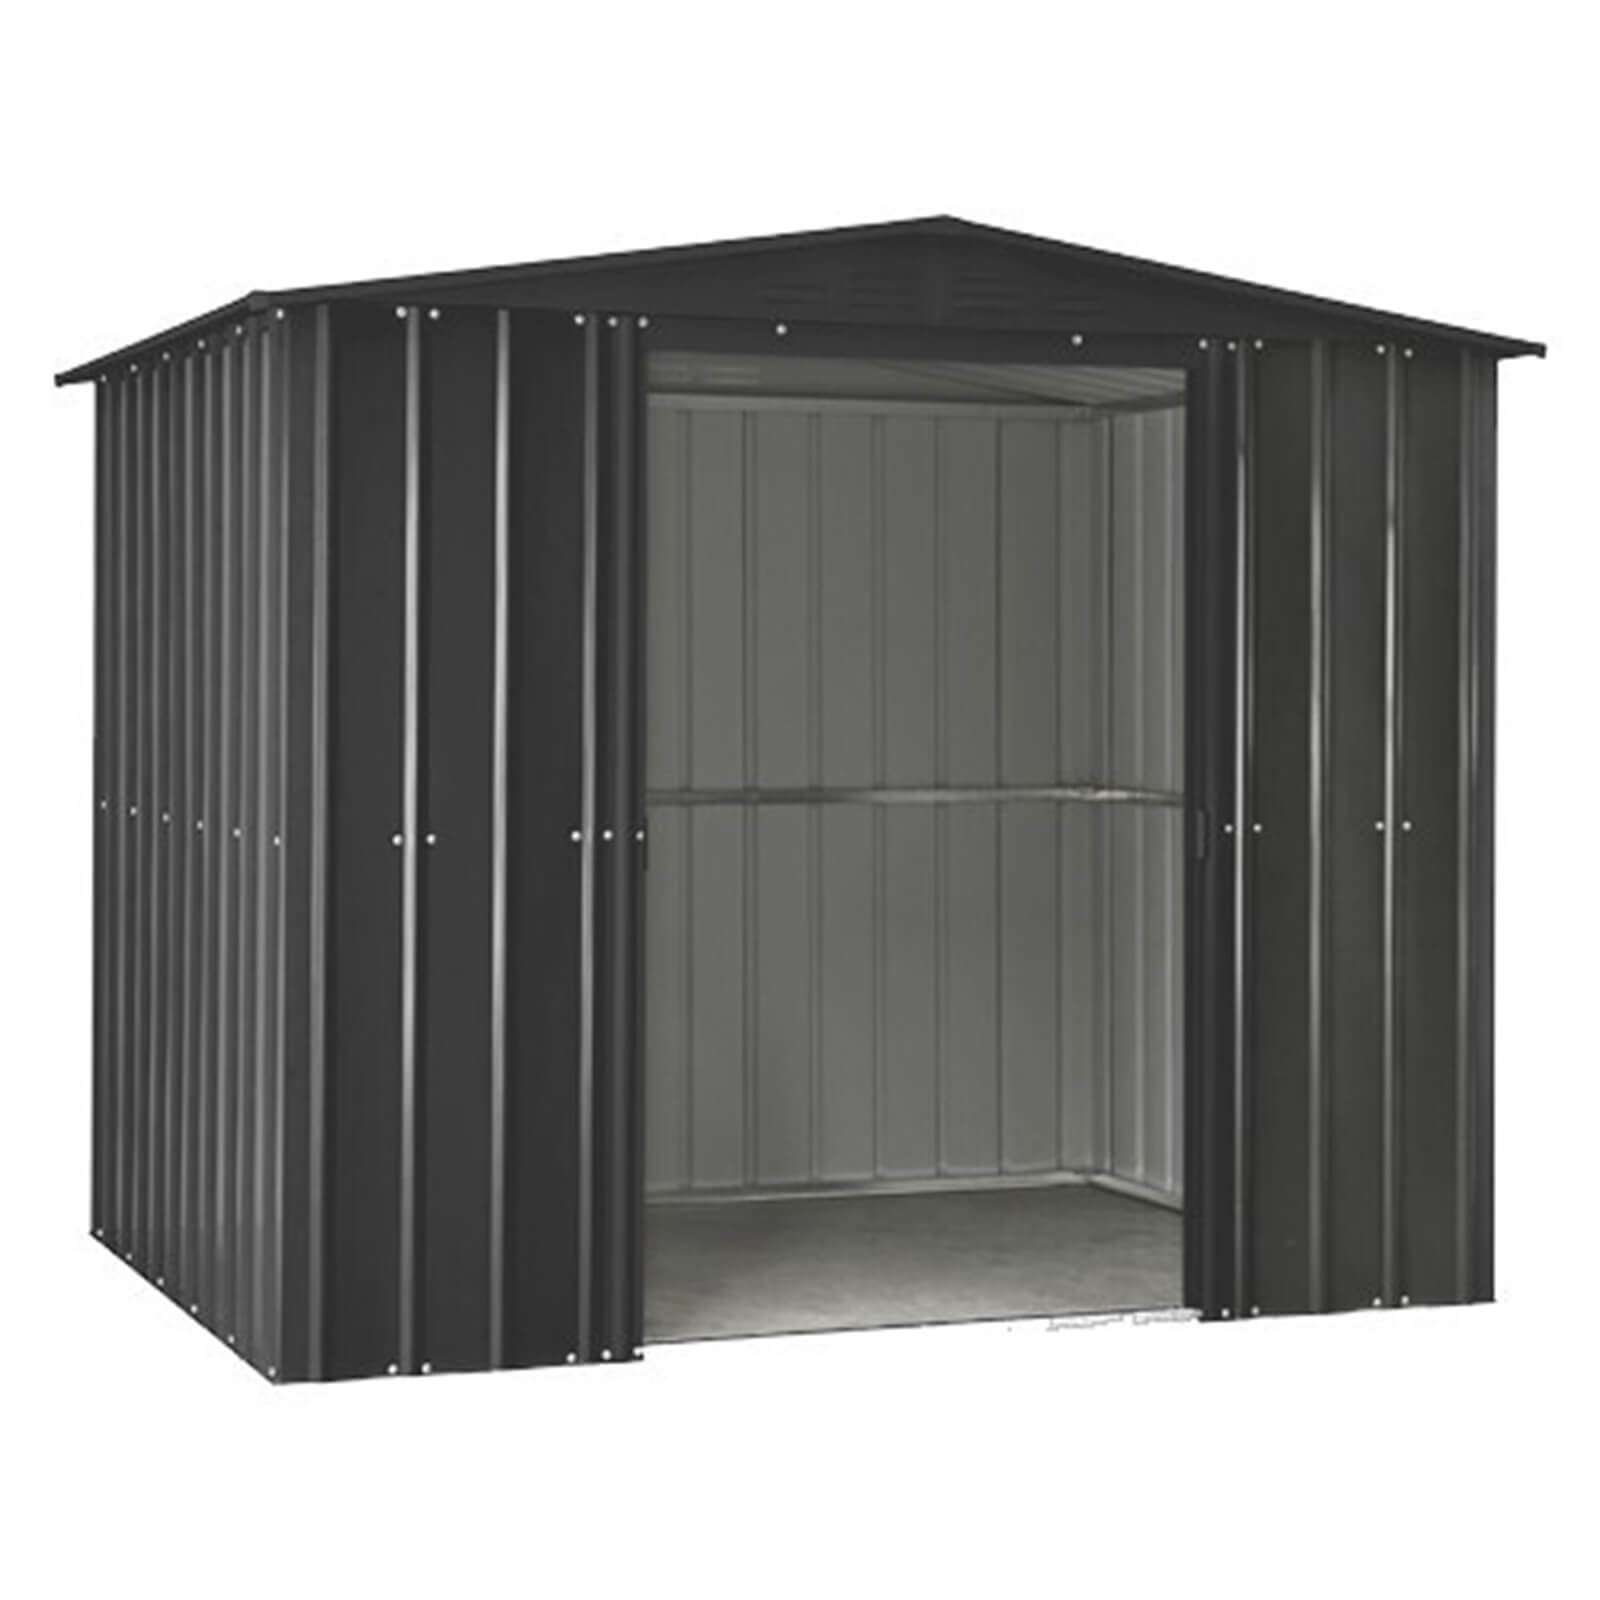 Lotus 8x5ft Metal Shed Solid - Anthracite Grey